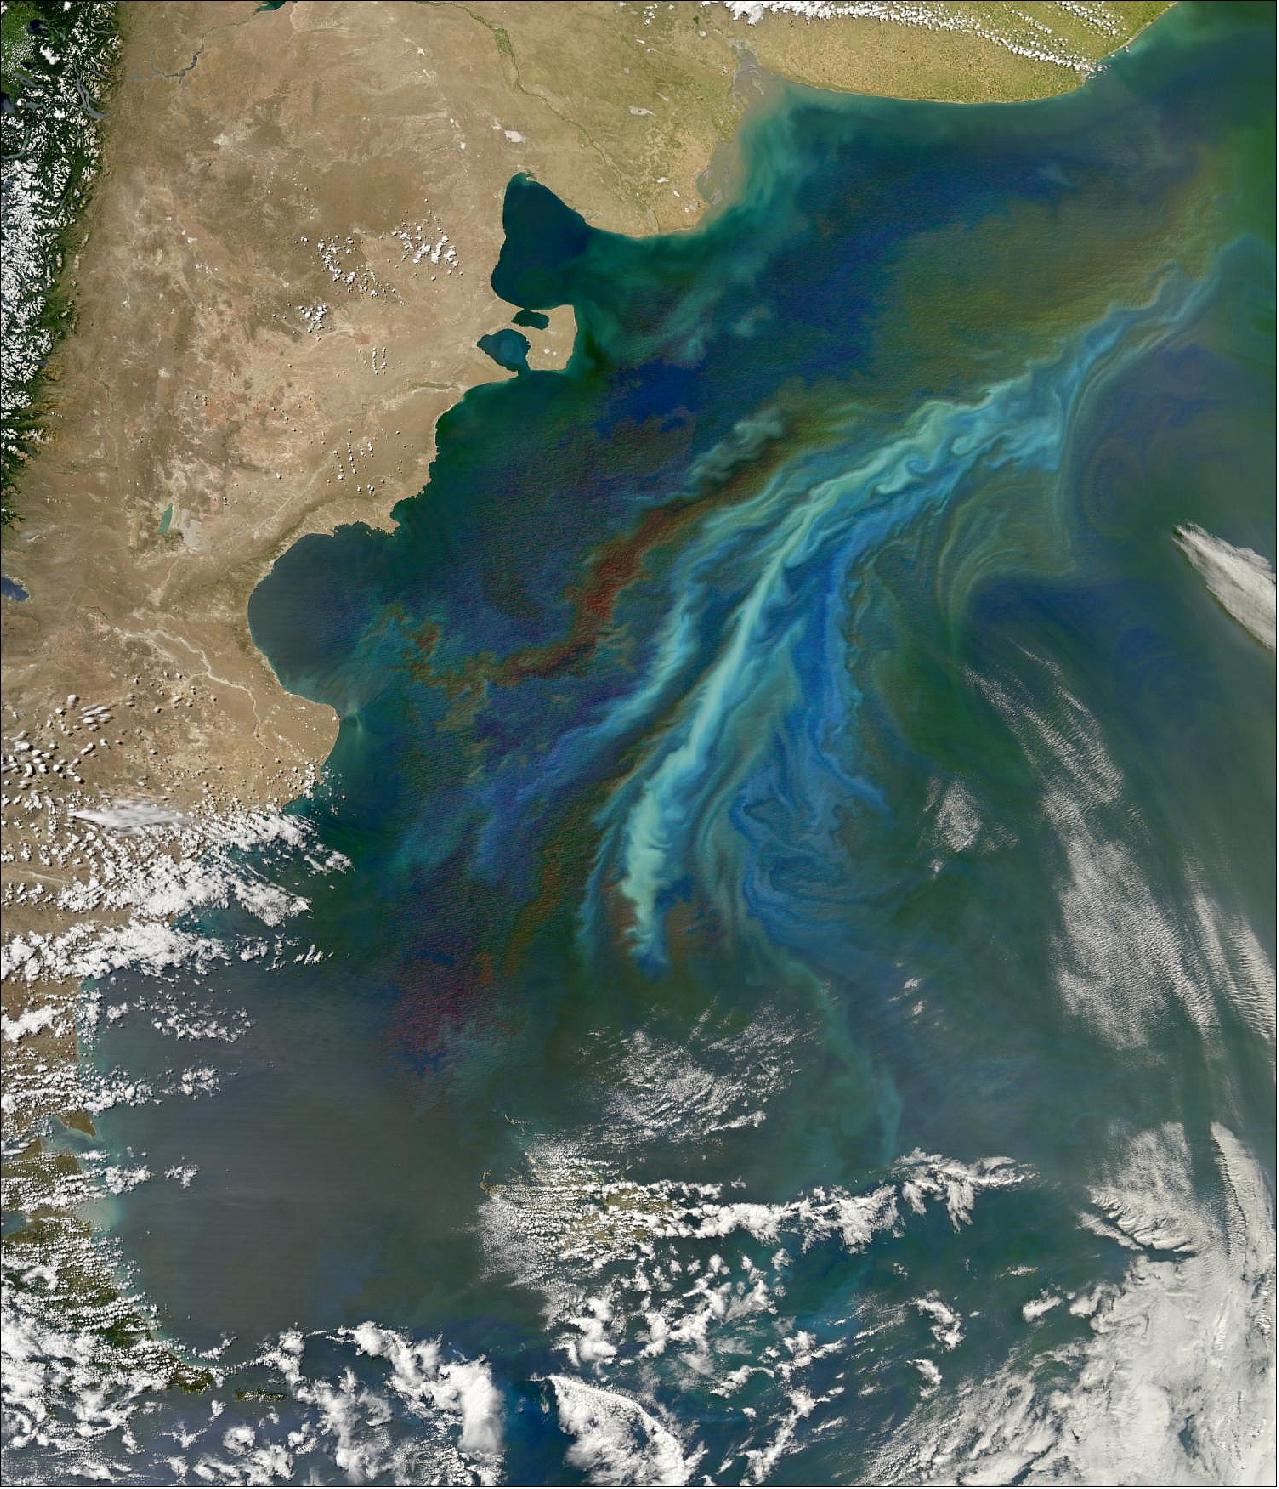 Figure 14: Off the coast of Argentina, two strong ocean currents recently stirred up a colorful brew of floating nutrients and microscopic plant life just in time for the summer solstice, Dec. 21, 2010. The Moderate Resolution Imaging Spectroradiometer (MODIS) on NASA's Aqua satellite captured this image of a massive phytoplankton bloom off of the Atlantic coast of Patagonia (image credit: NASA's Earth Observatory, Norman Kuring, Ocean Color Web)